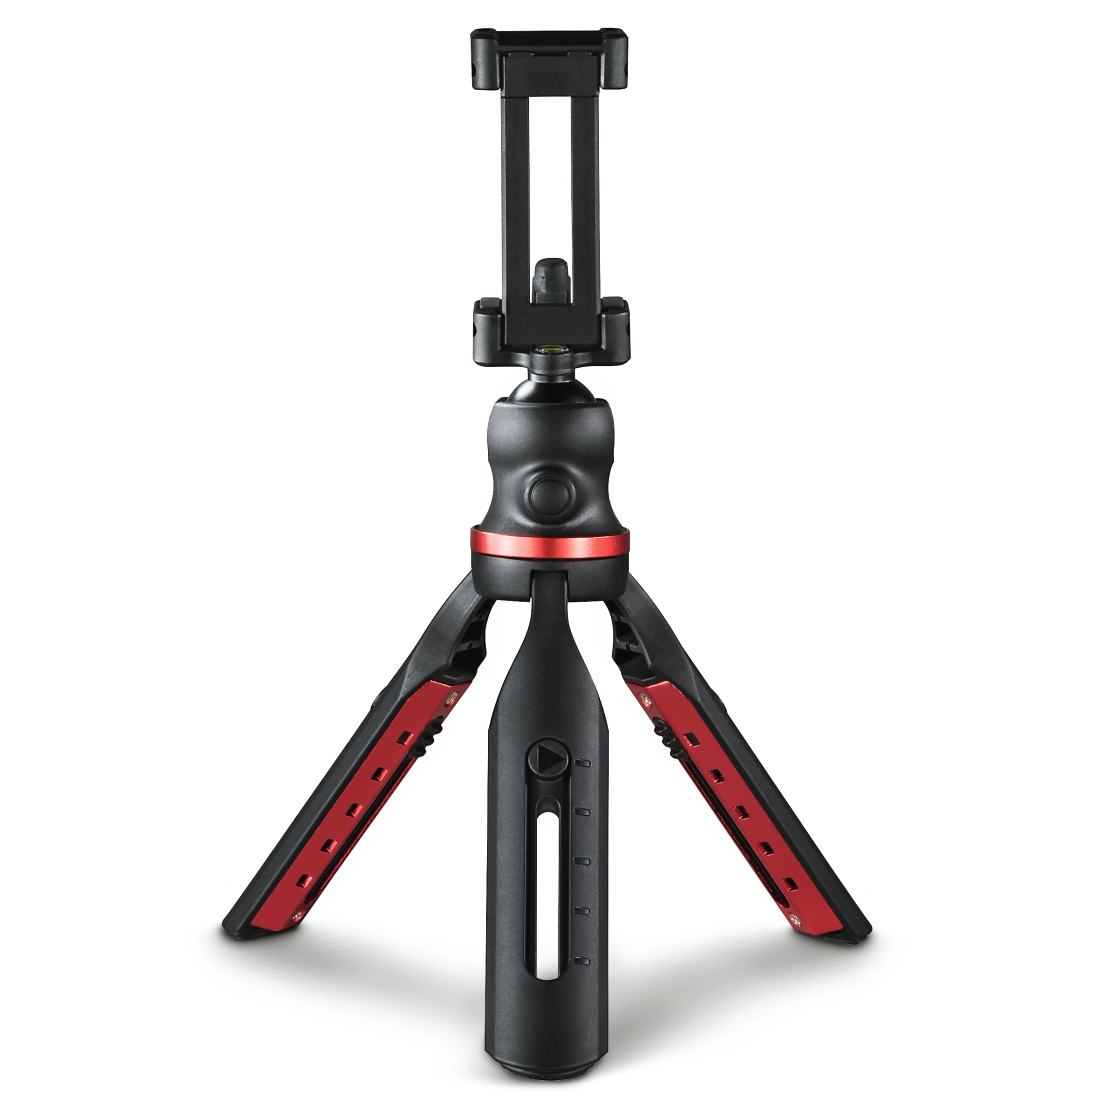 HAMA Solid Table Tripod for Smartphones and Photo Cameras, 19B - Black